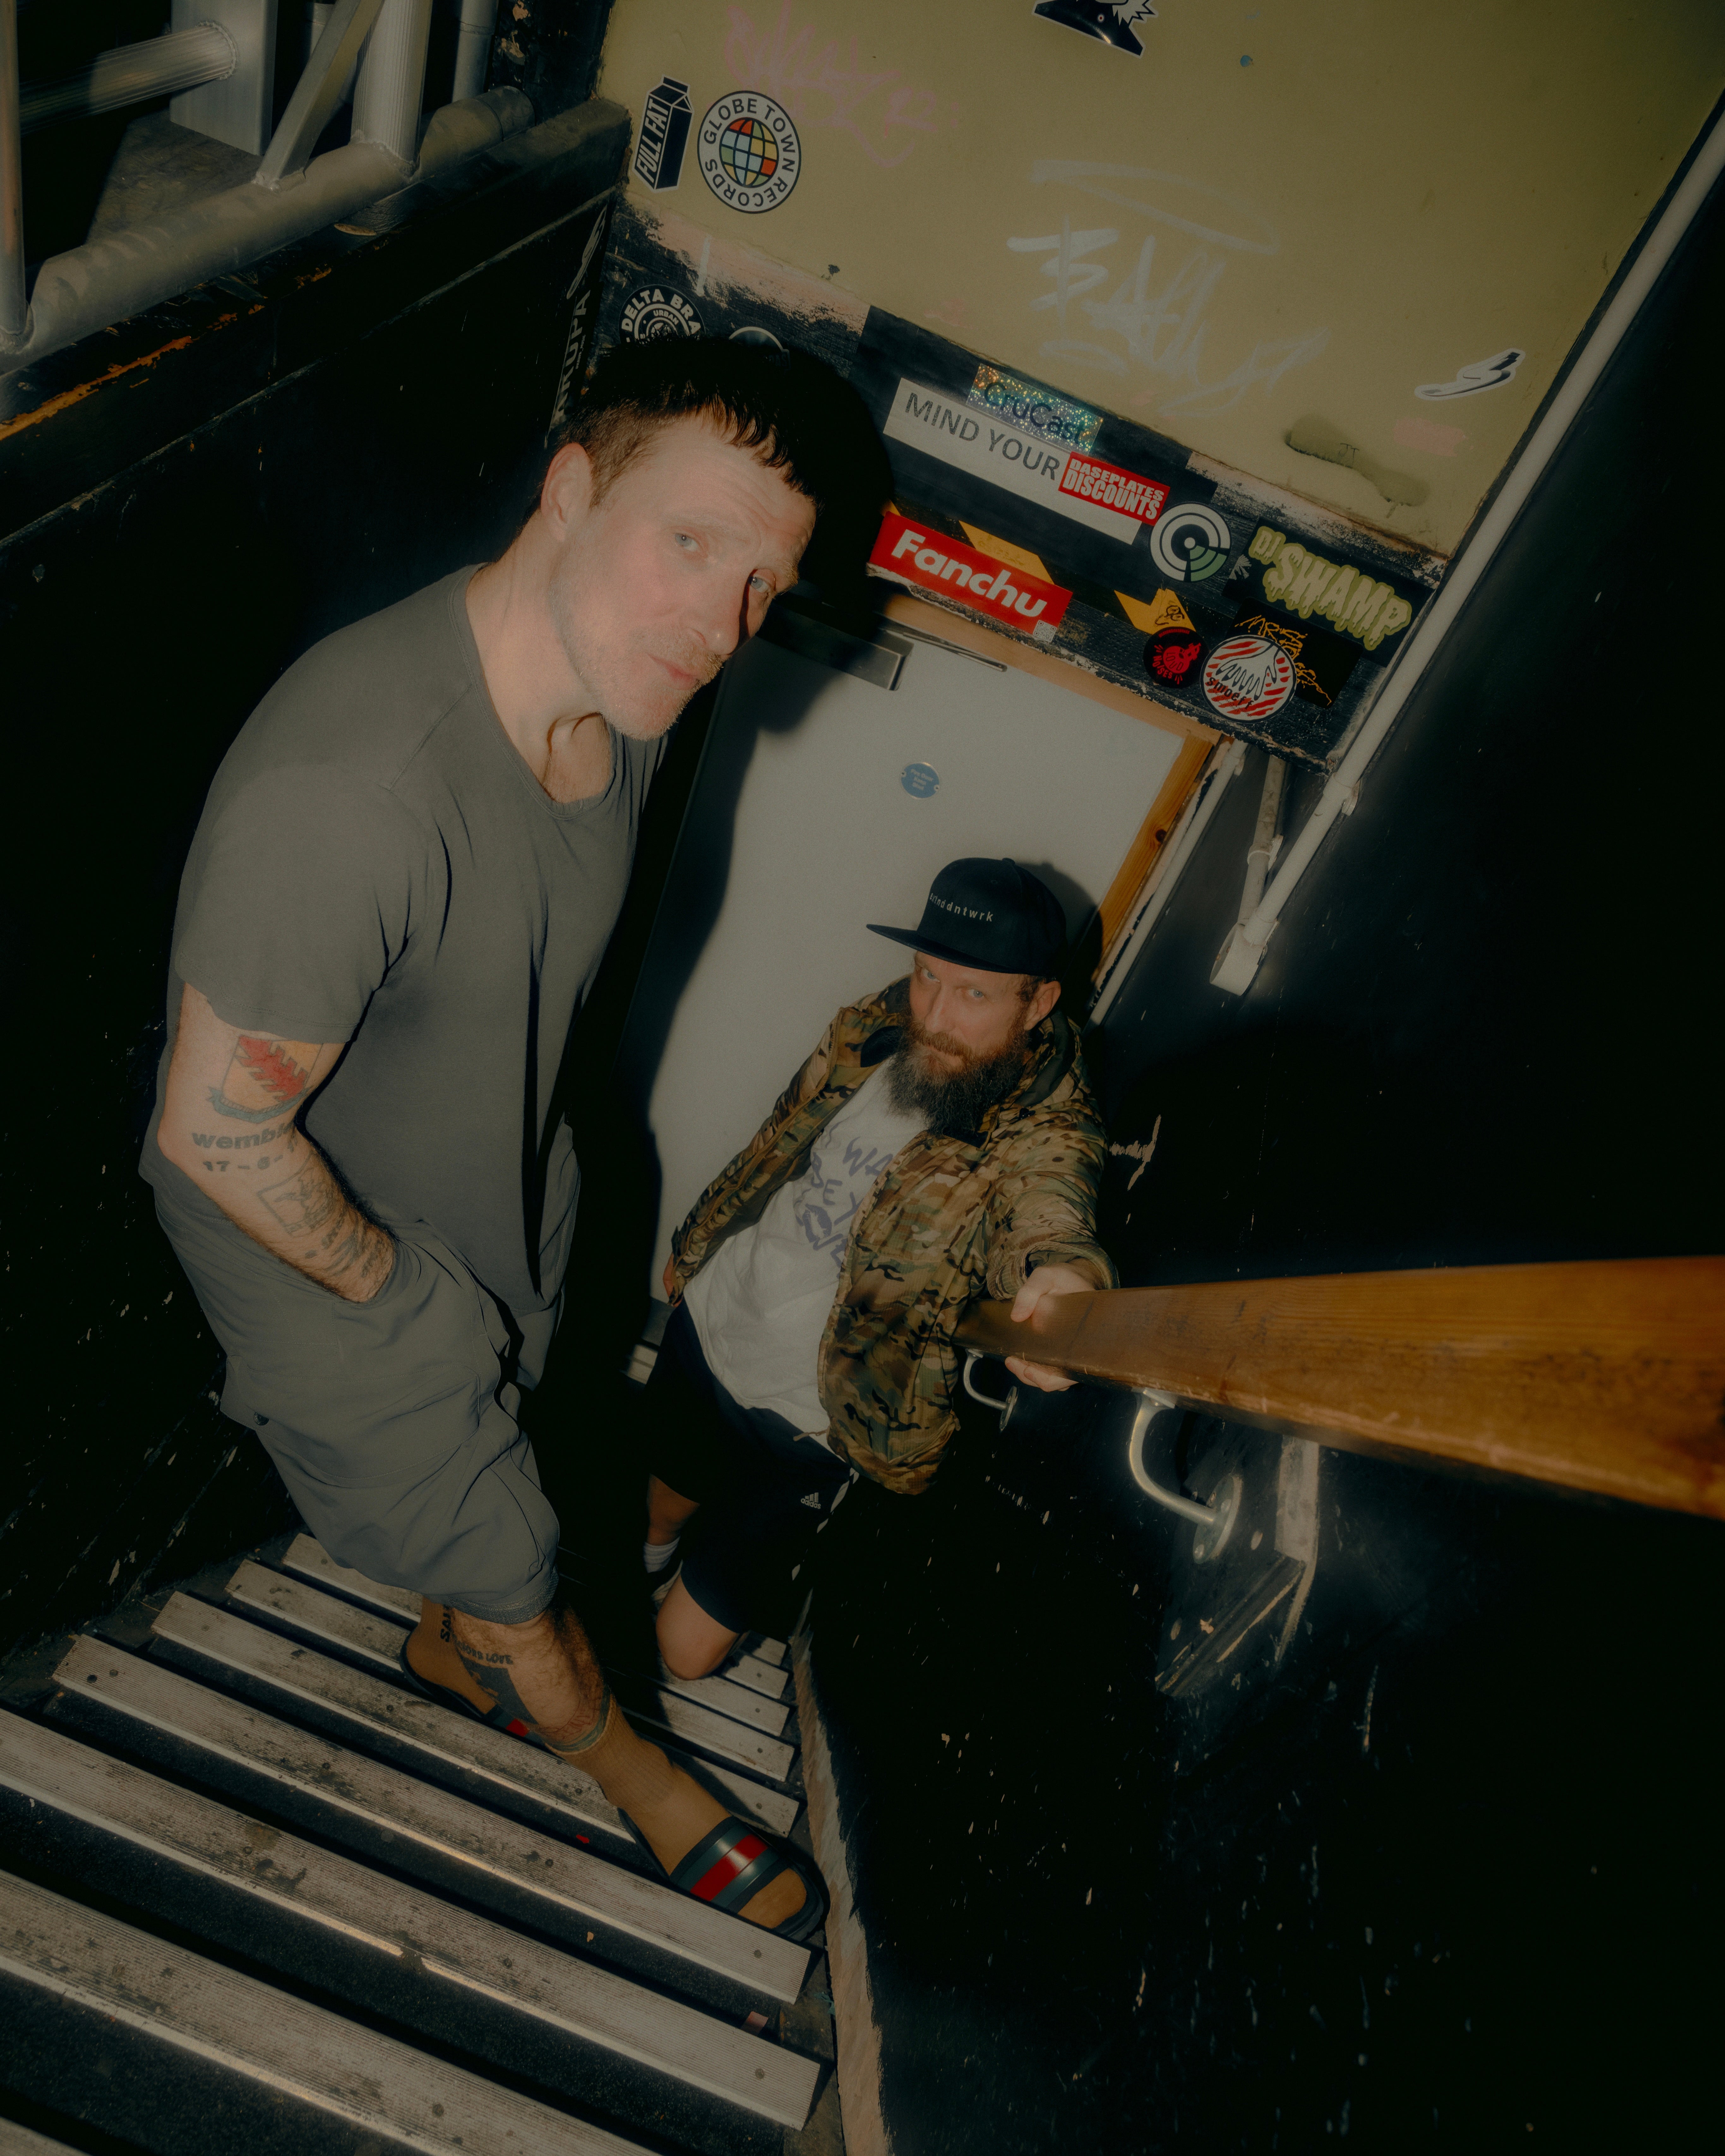 Sleaford Mods in Newcastle Upon Tyne promo photo for Live Nation presale offer code